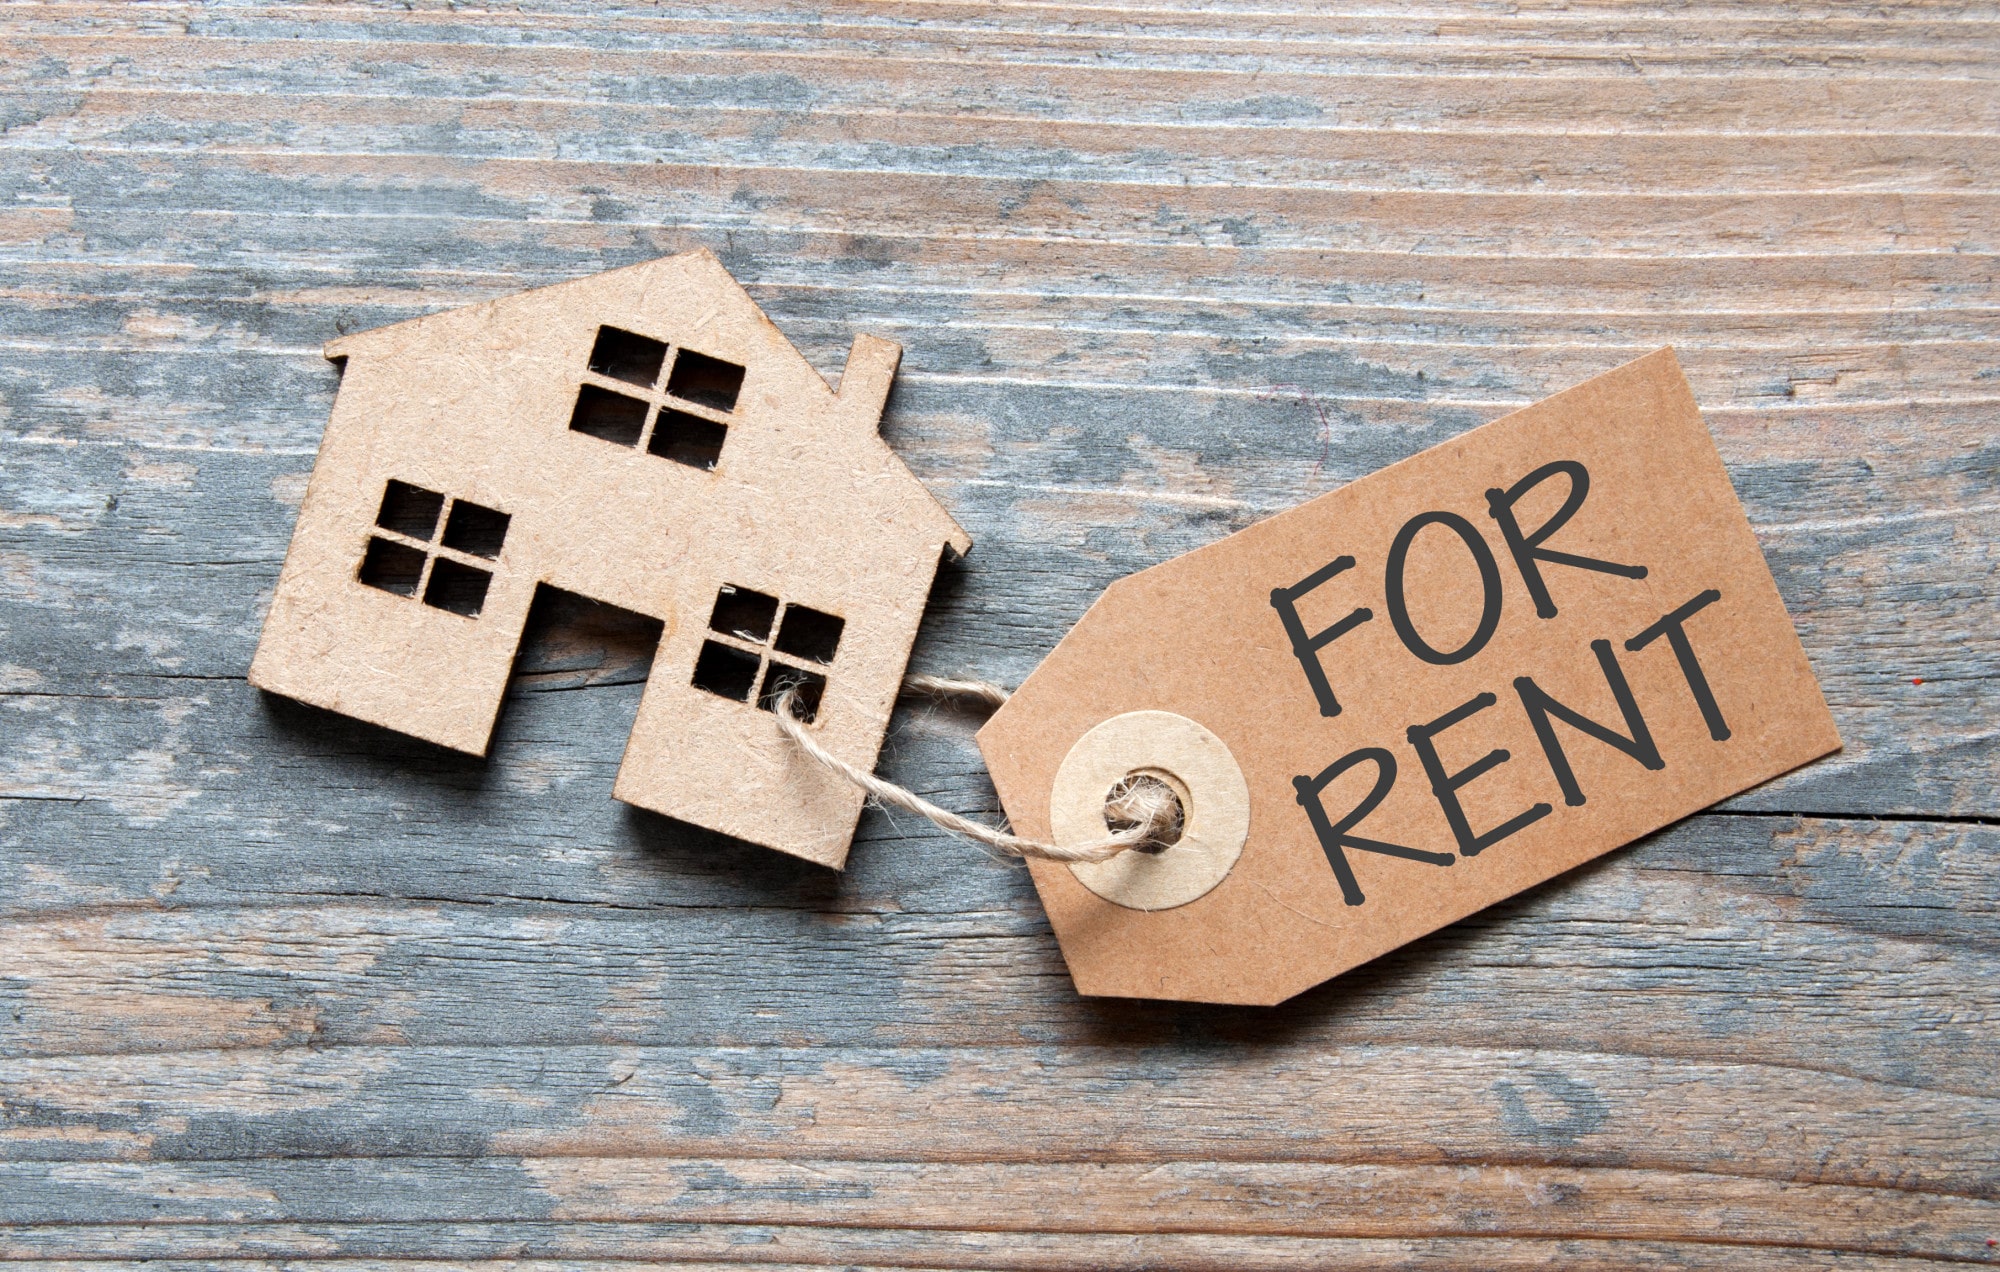 What to Consider When Looking for Homes for Rent